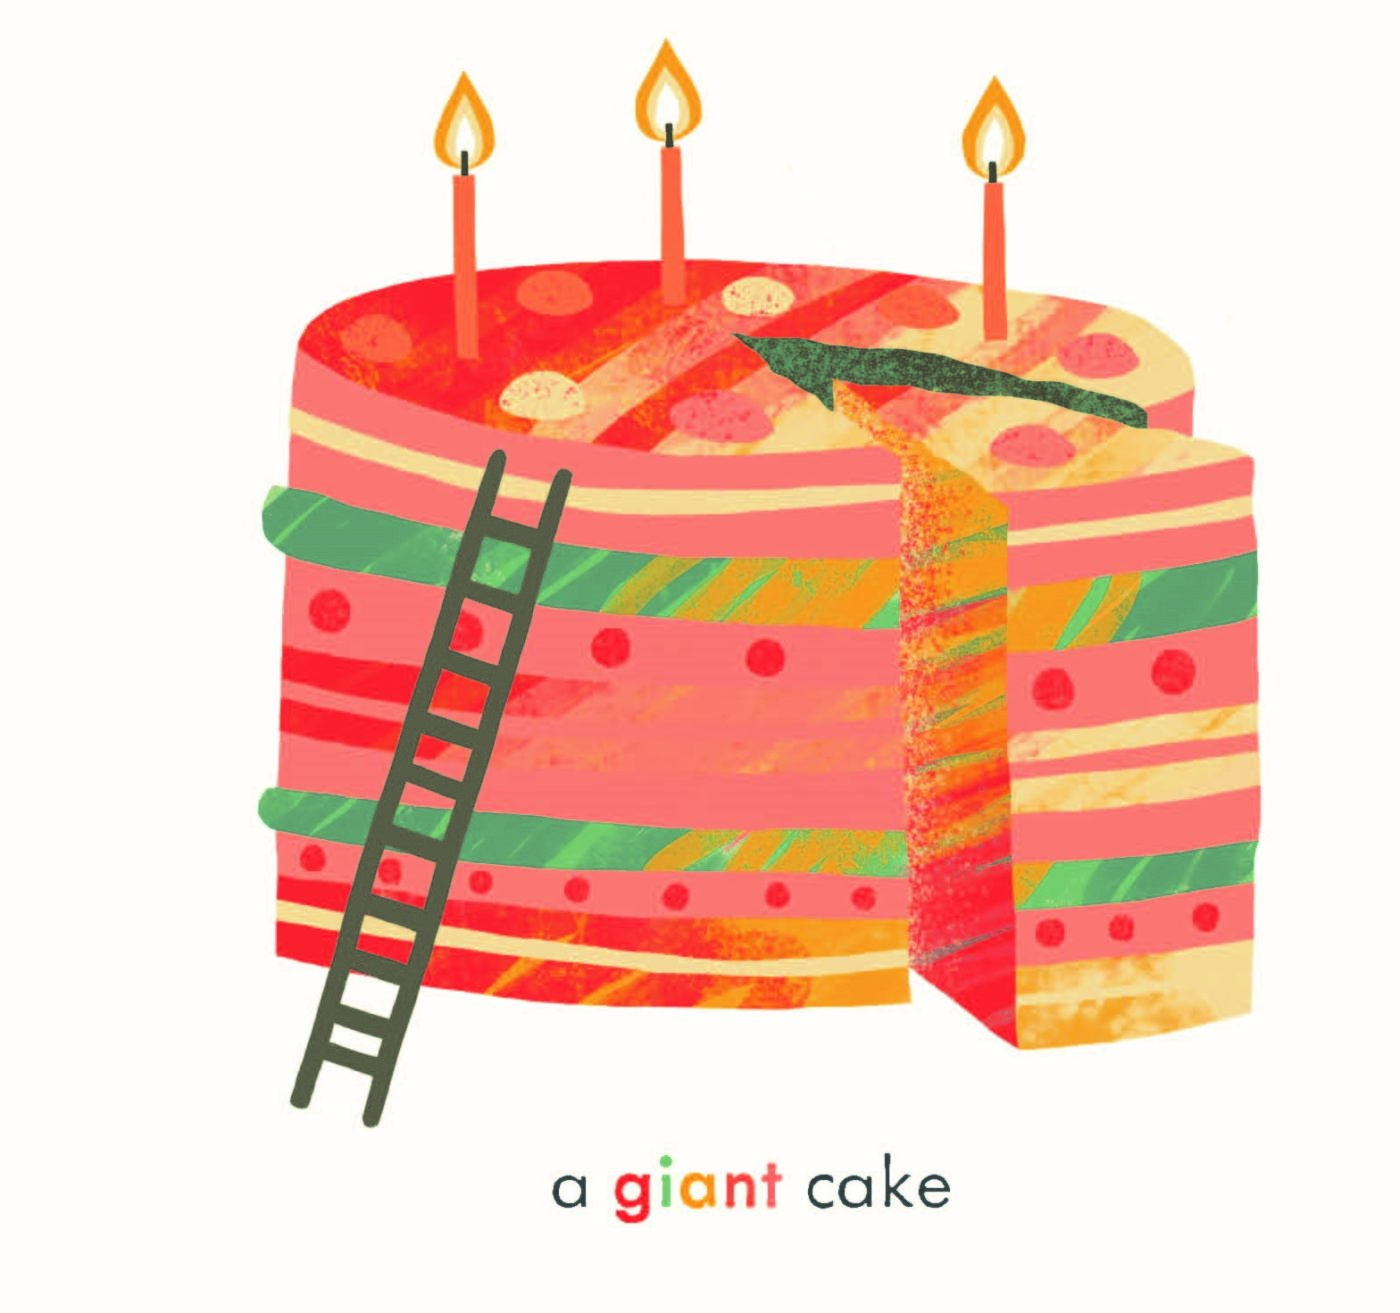 An image of a orange and pink illustrated cake with a slice cut out of it and a ladder leaning against it.